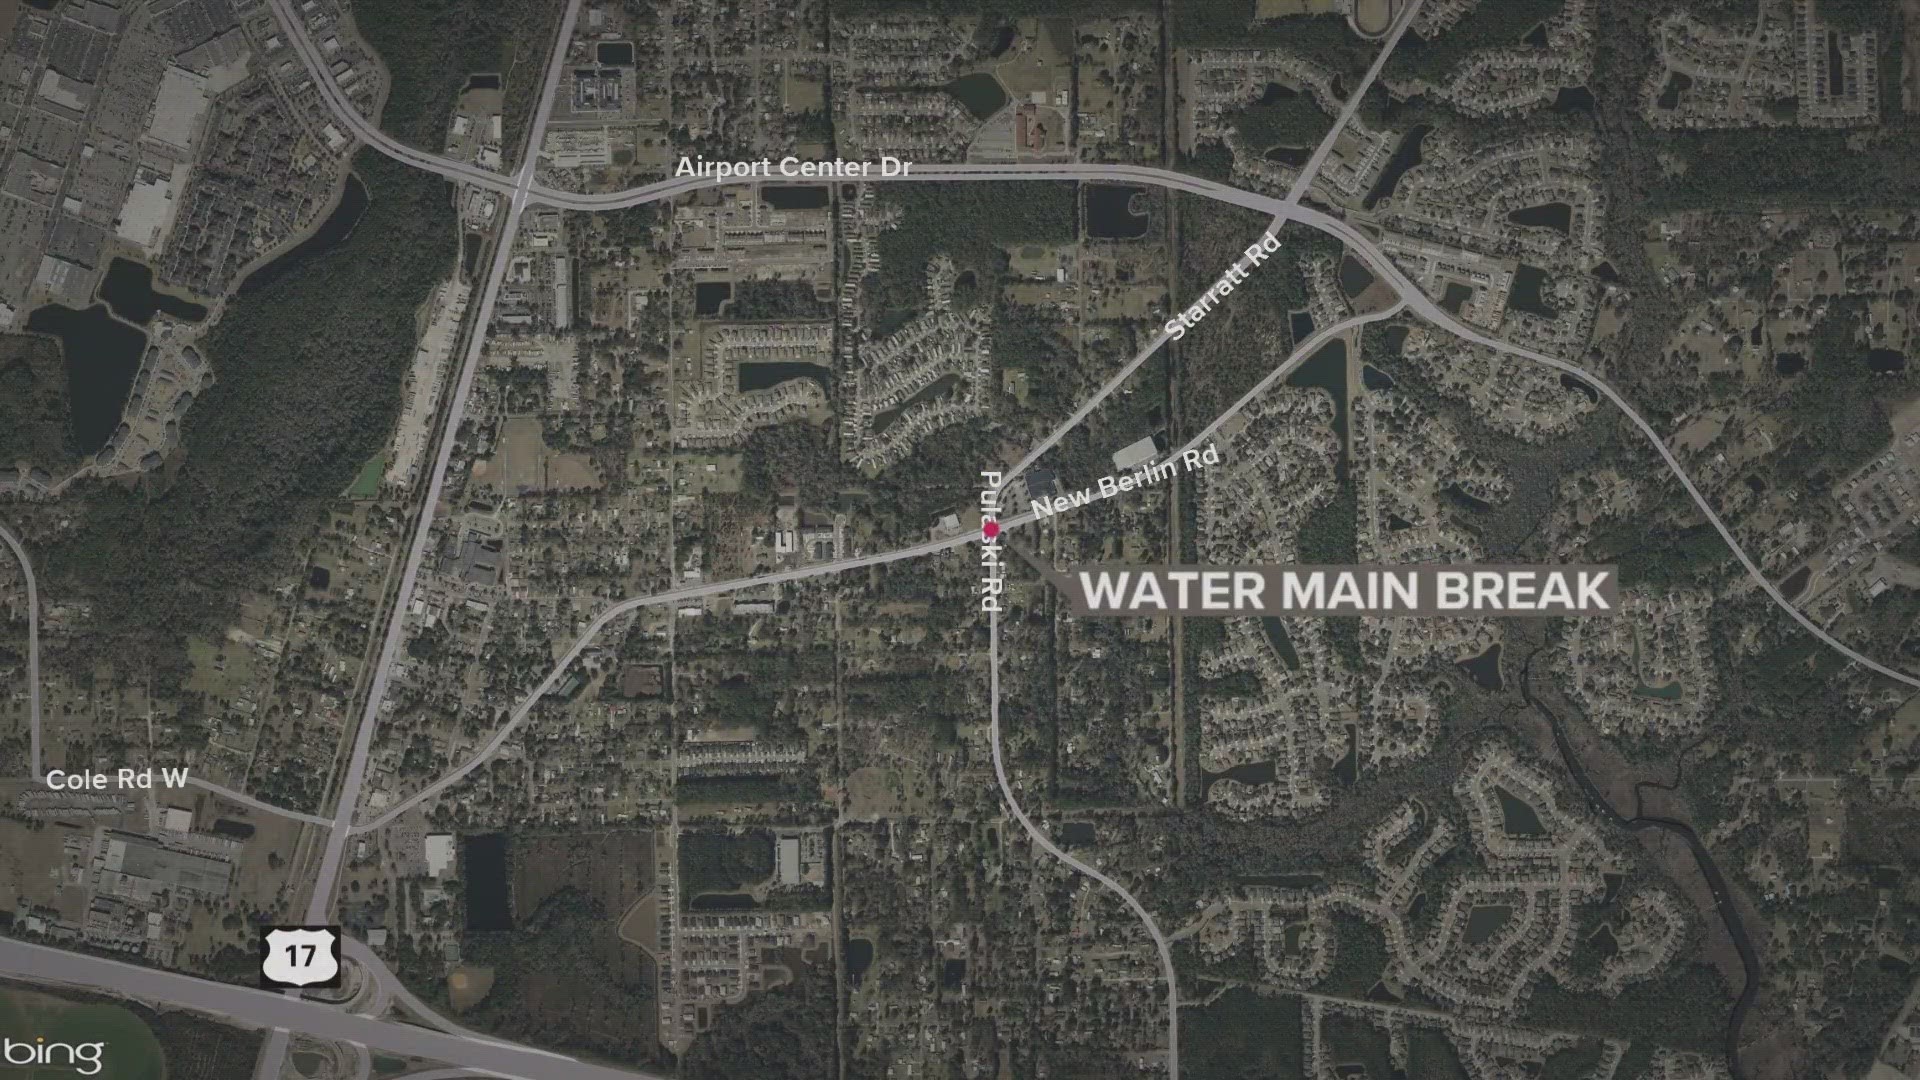 The water main break was reported by the Jacksonville Sheriff's Office around 5:20 p.m. Wednesday.